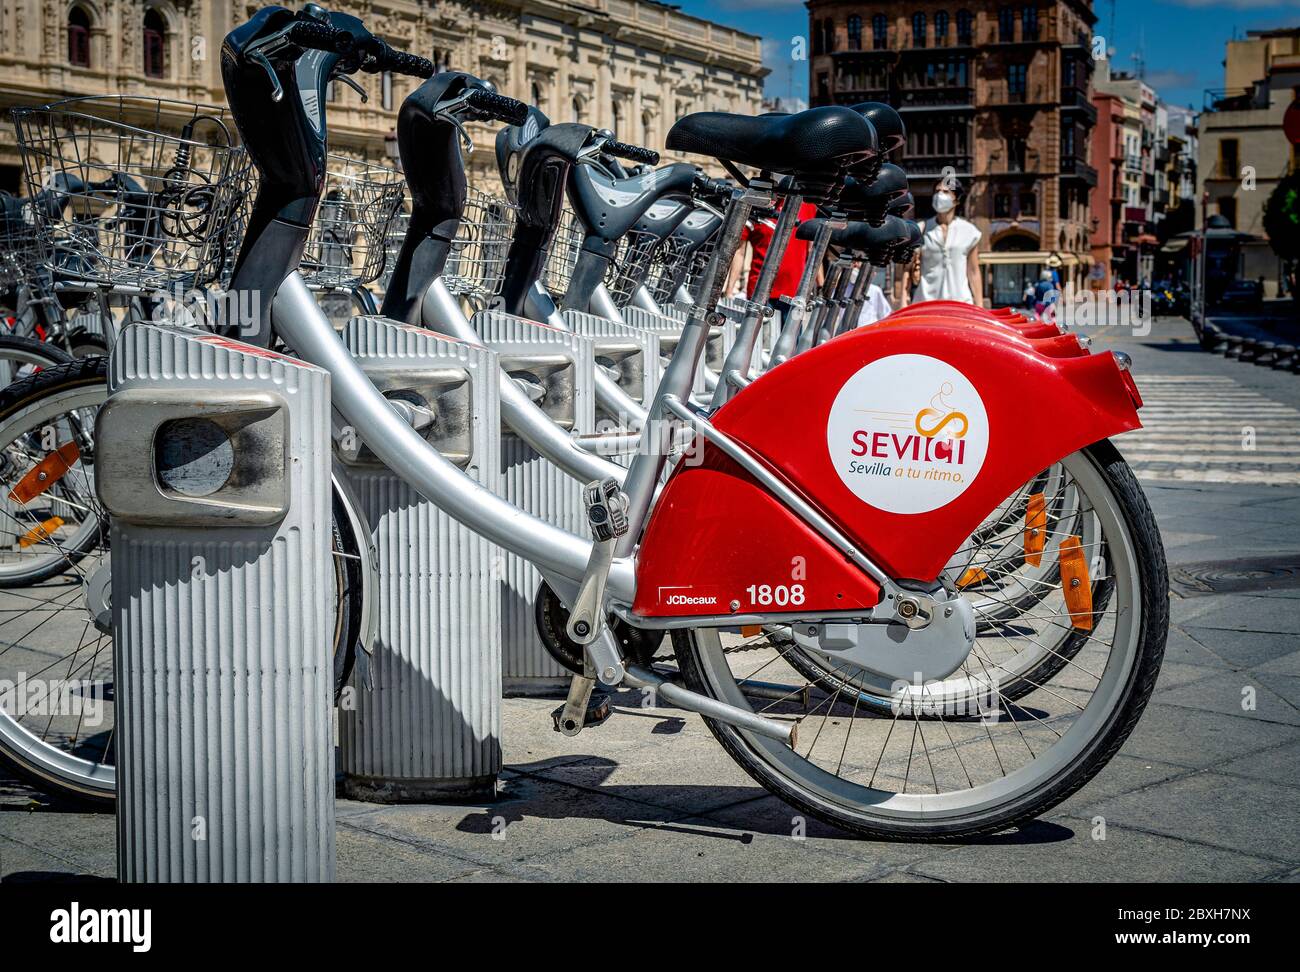 Seville, Spain; June 7, 2020: Selective focus on a parked bicycle of the Sevici bicycles rental service in Seville, Andalusia, Spain, Europe Stock Photo